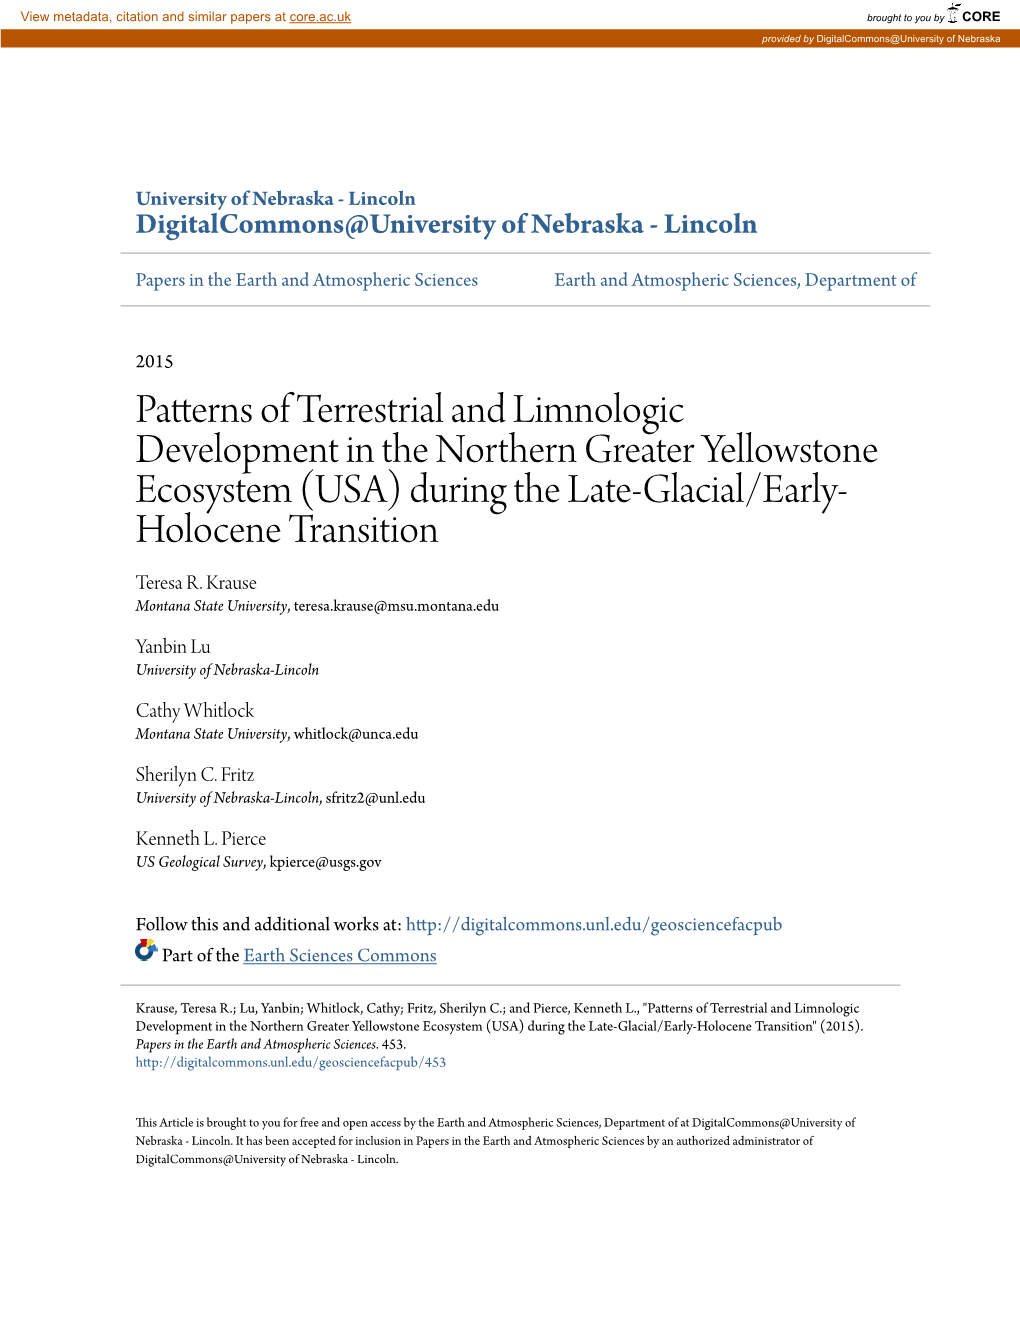 Patterns of Terrestrial and Limnologic Development in the Northern Greater Yellowstone Ecosystem (USA) During the Late-Glacial/Early- Holocene Transition Teresa R